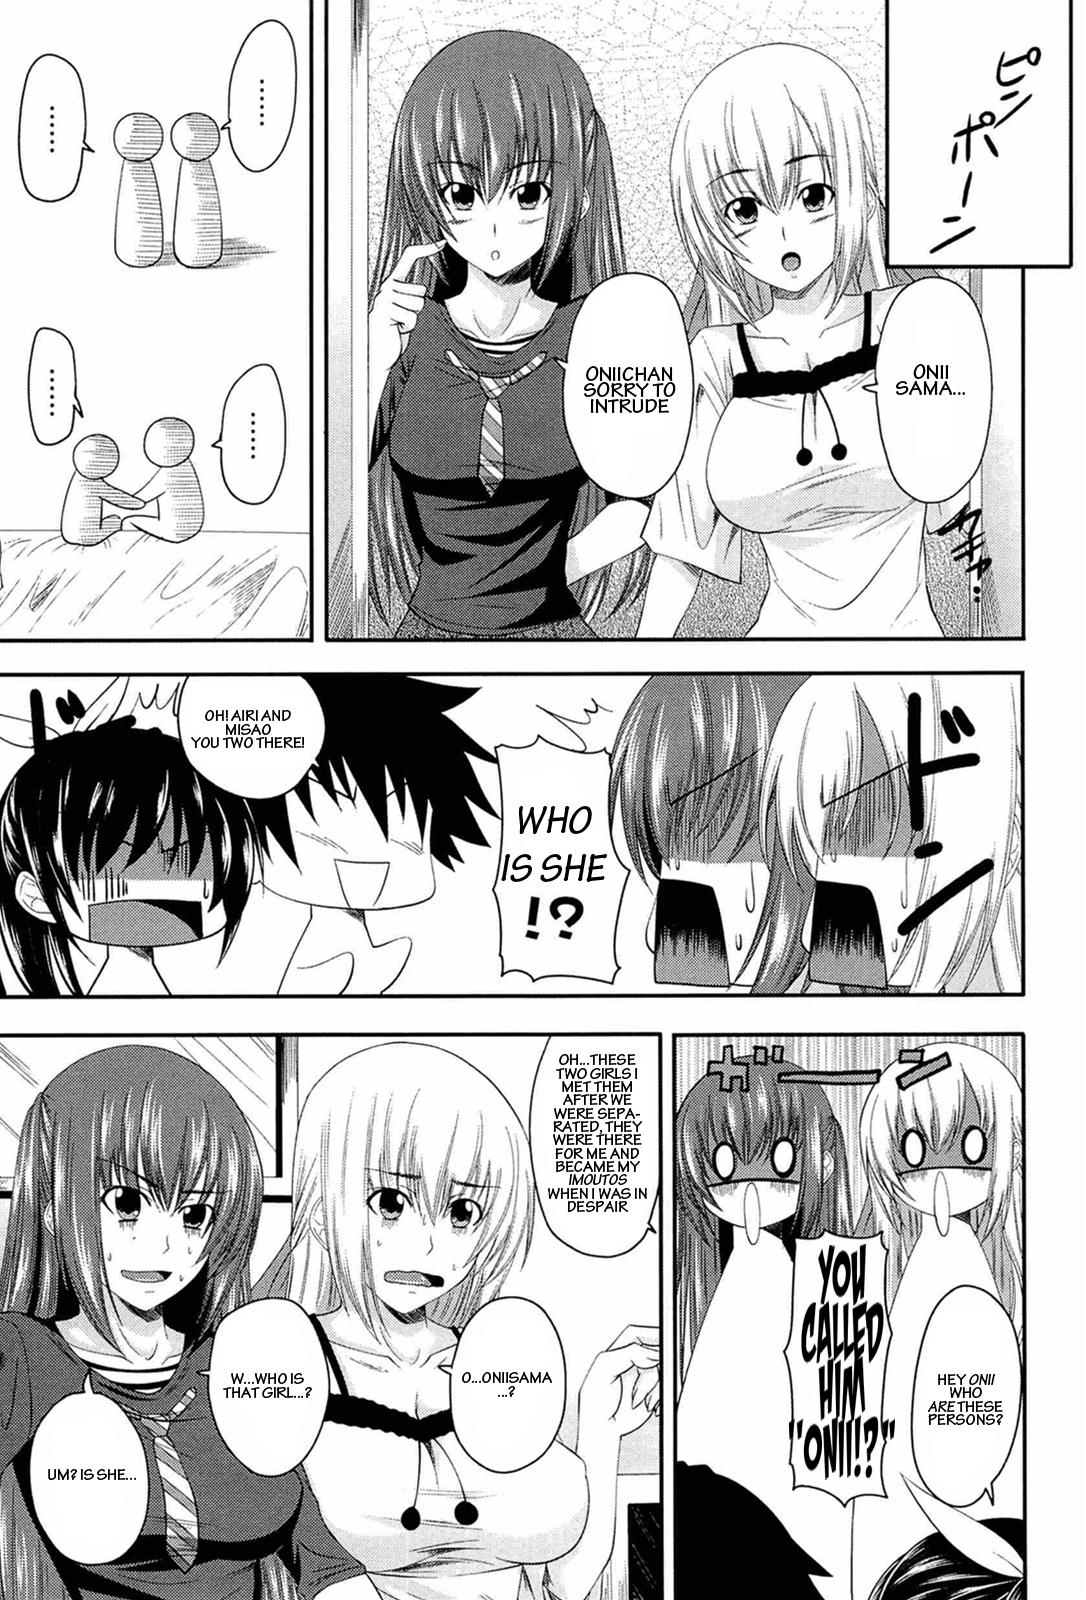 Hot Women Having Sex I, My, Me, Mine Ch. 3-6, 10 Picked Up - Page 5